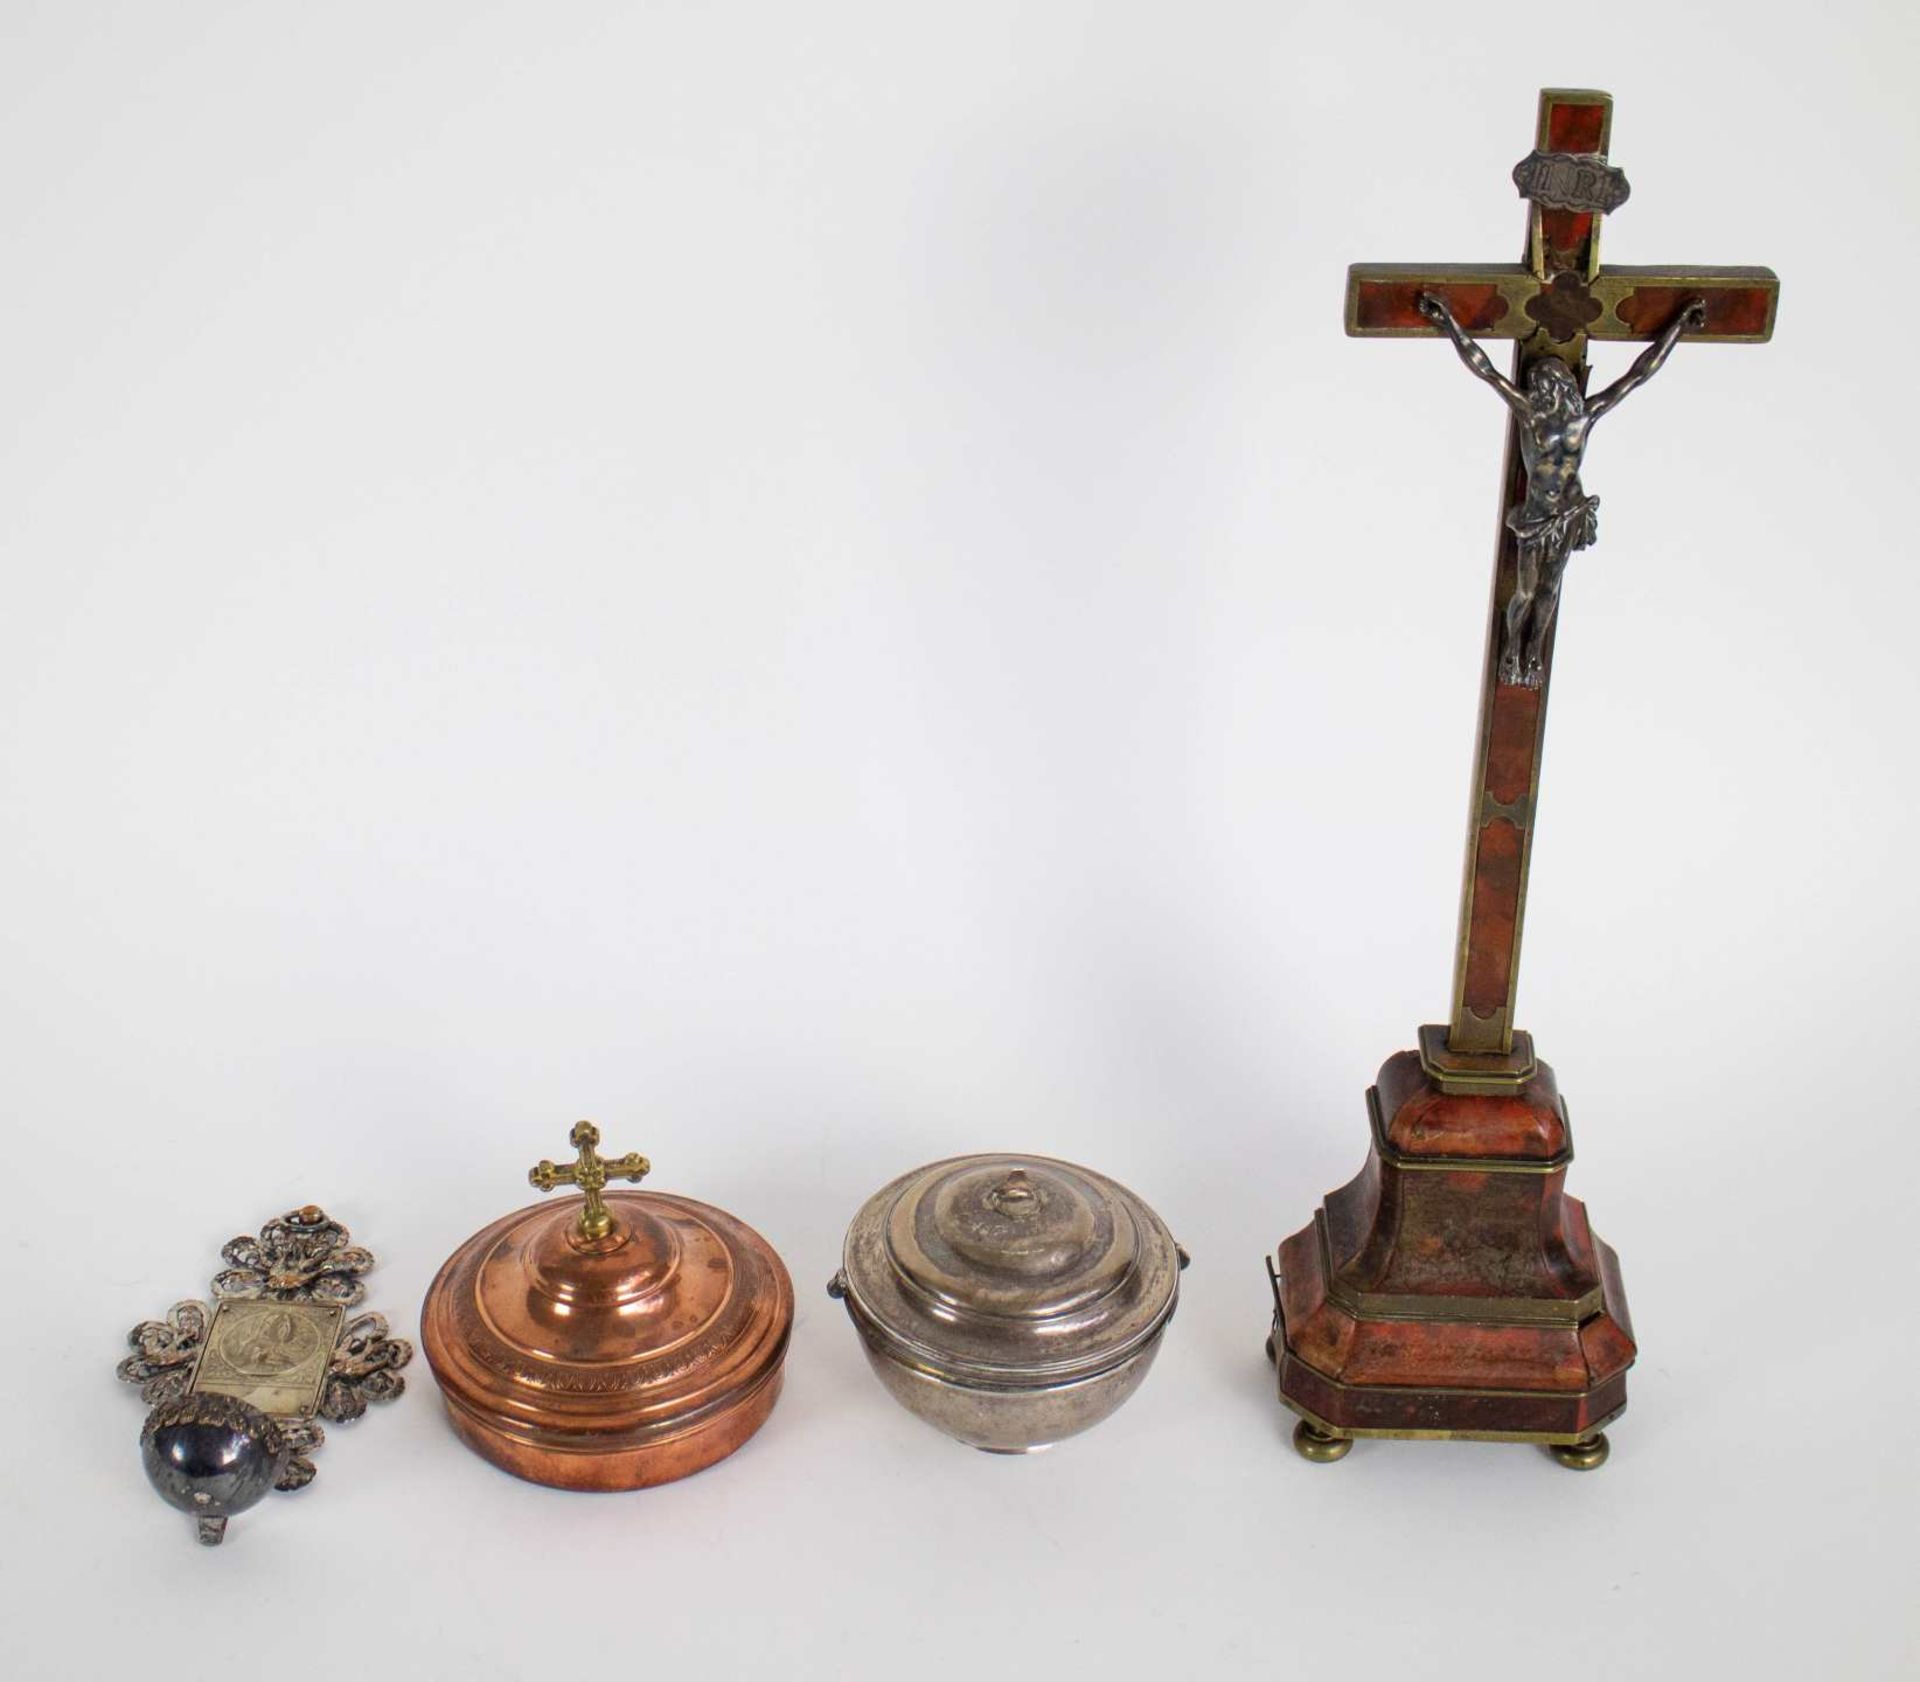 Lot with various religious items